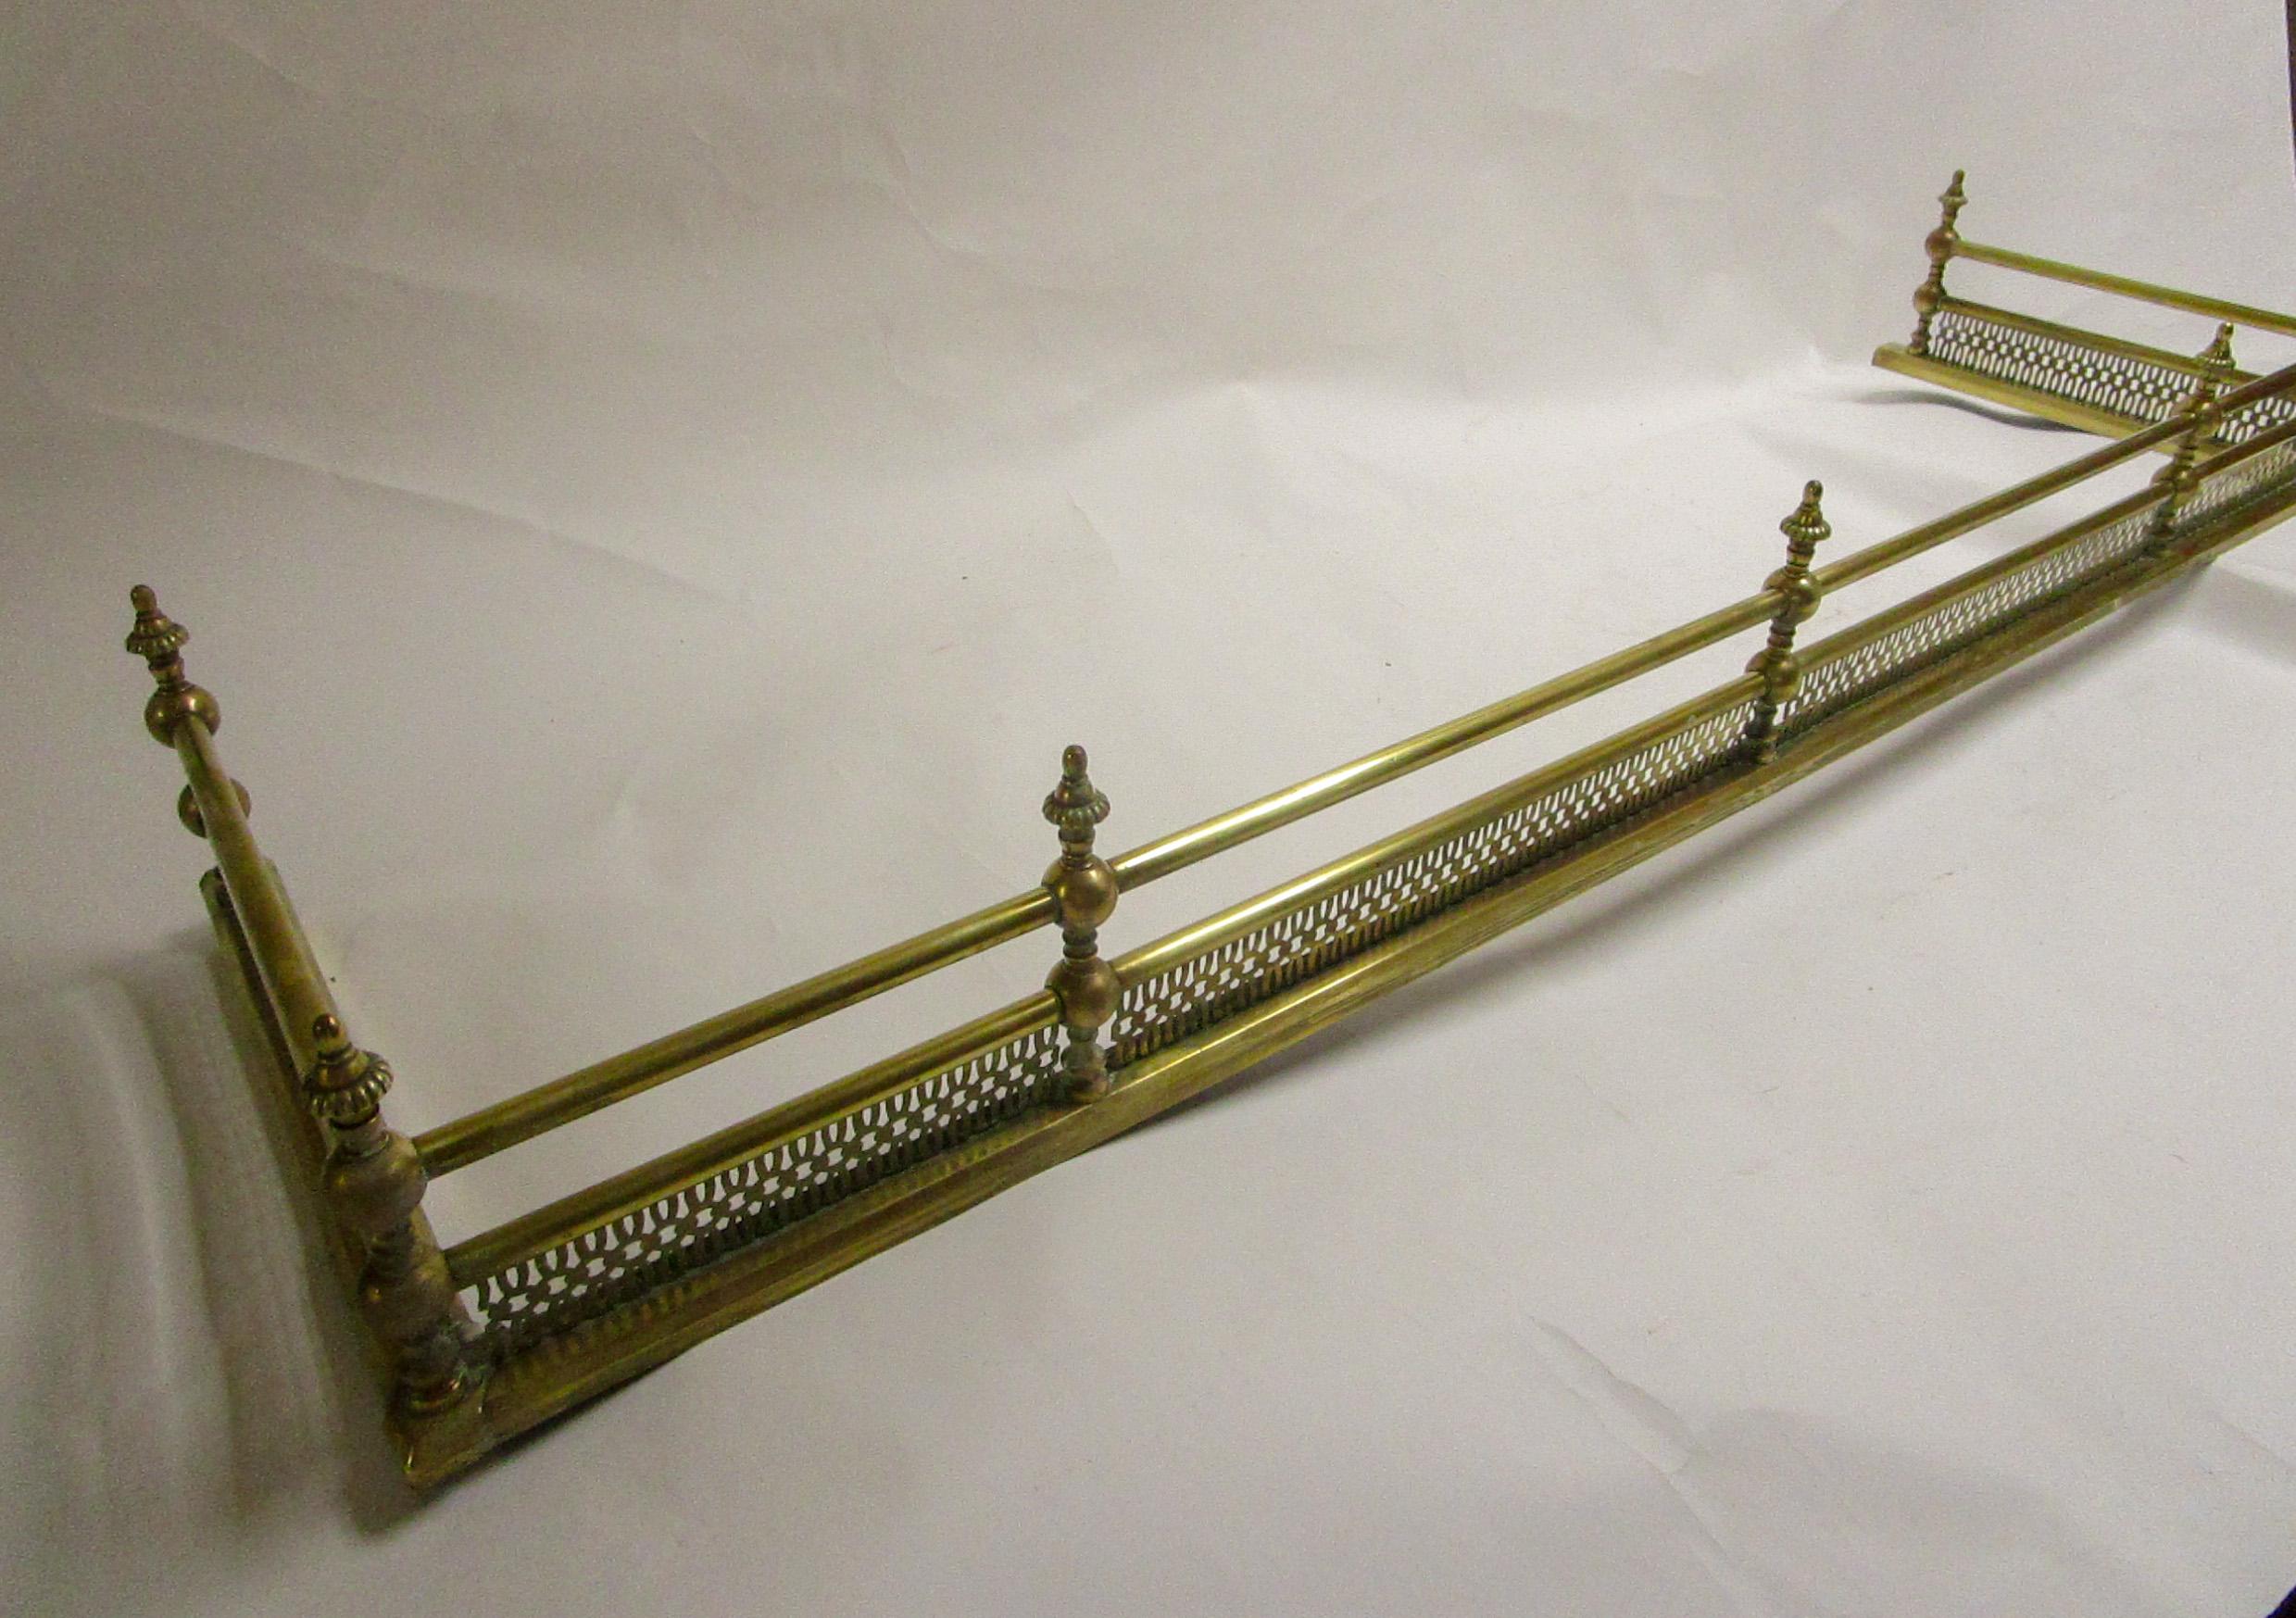 Classic Regency period brass fender having a reticulated frame work. A handsome solid piece in a large size. Inside measurements 59 inches wide x 15.75 deep. Over-all measurements above.